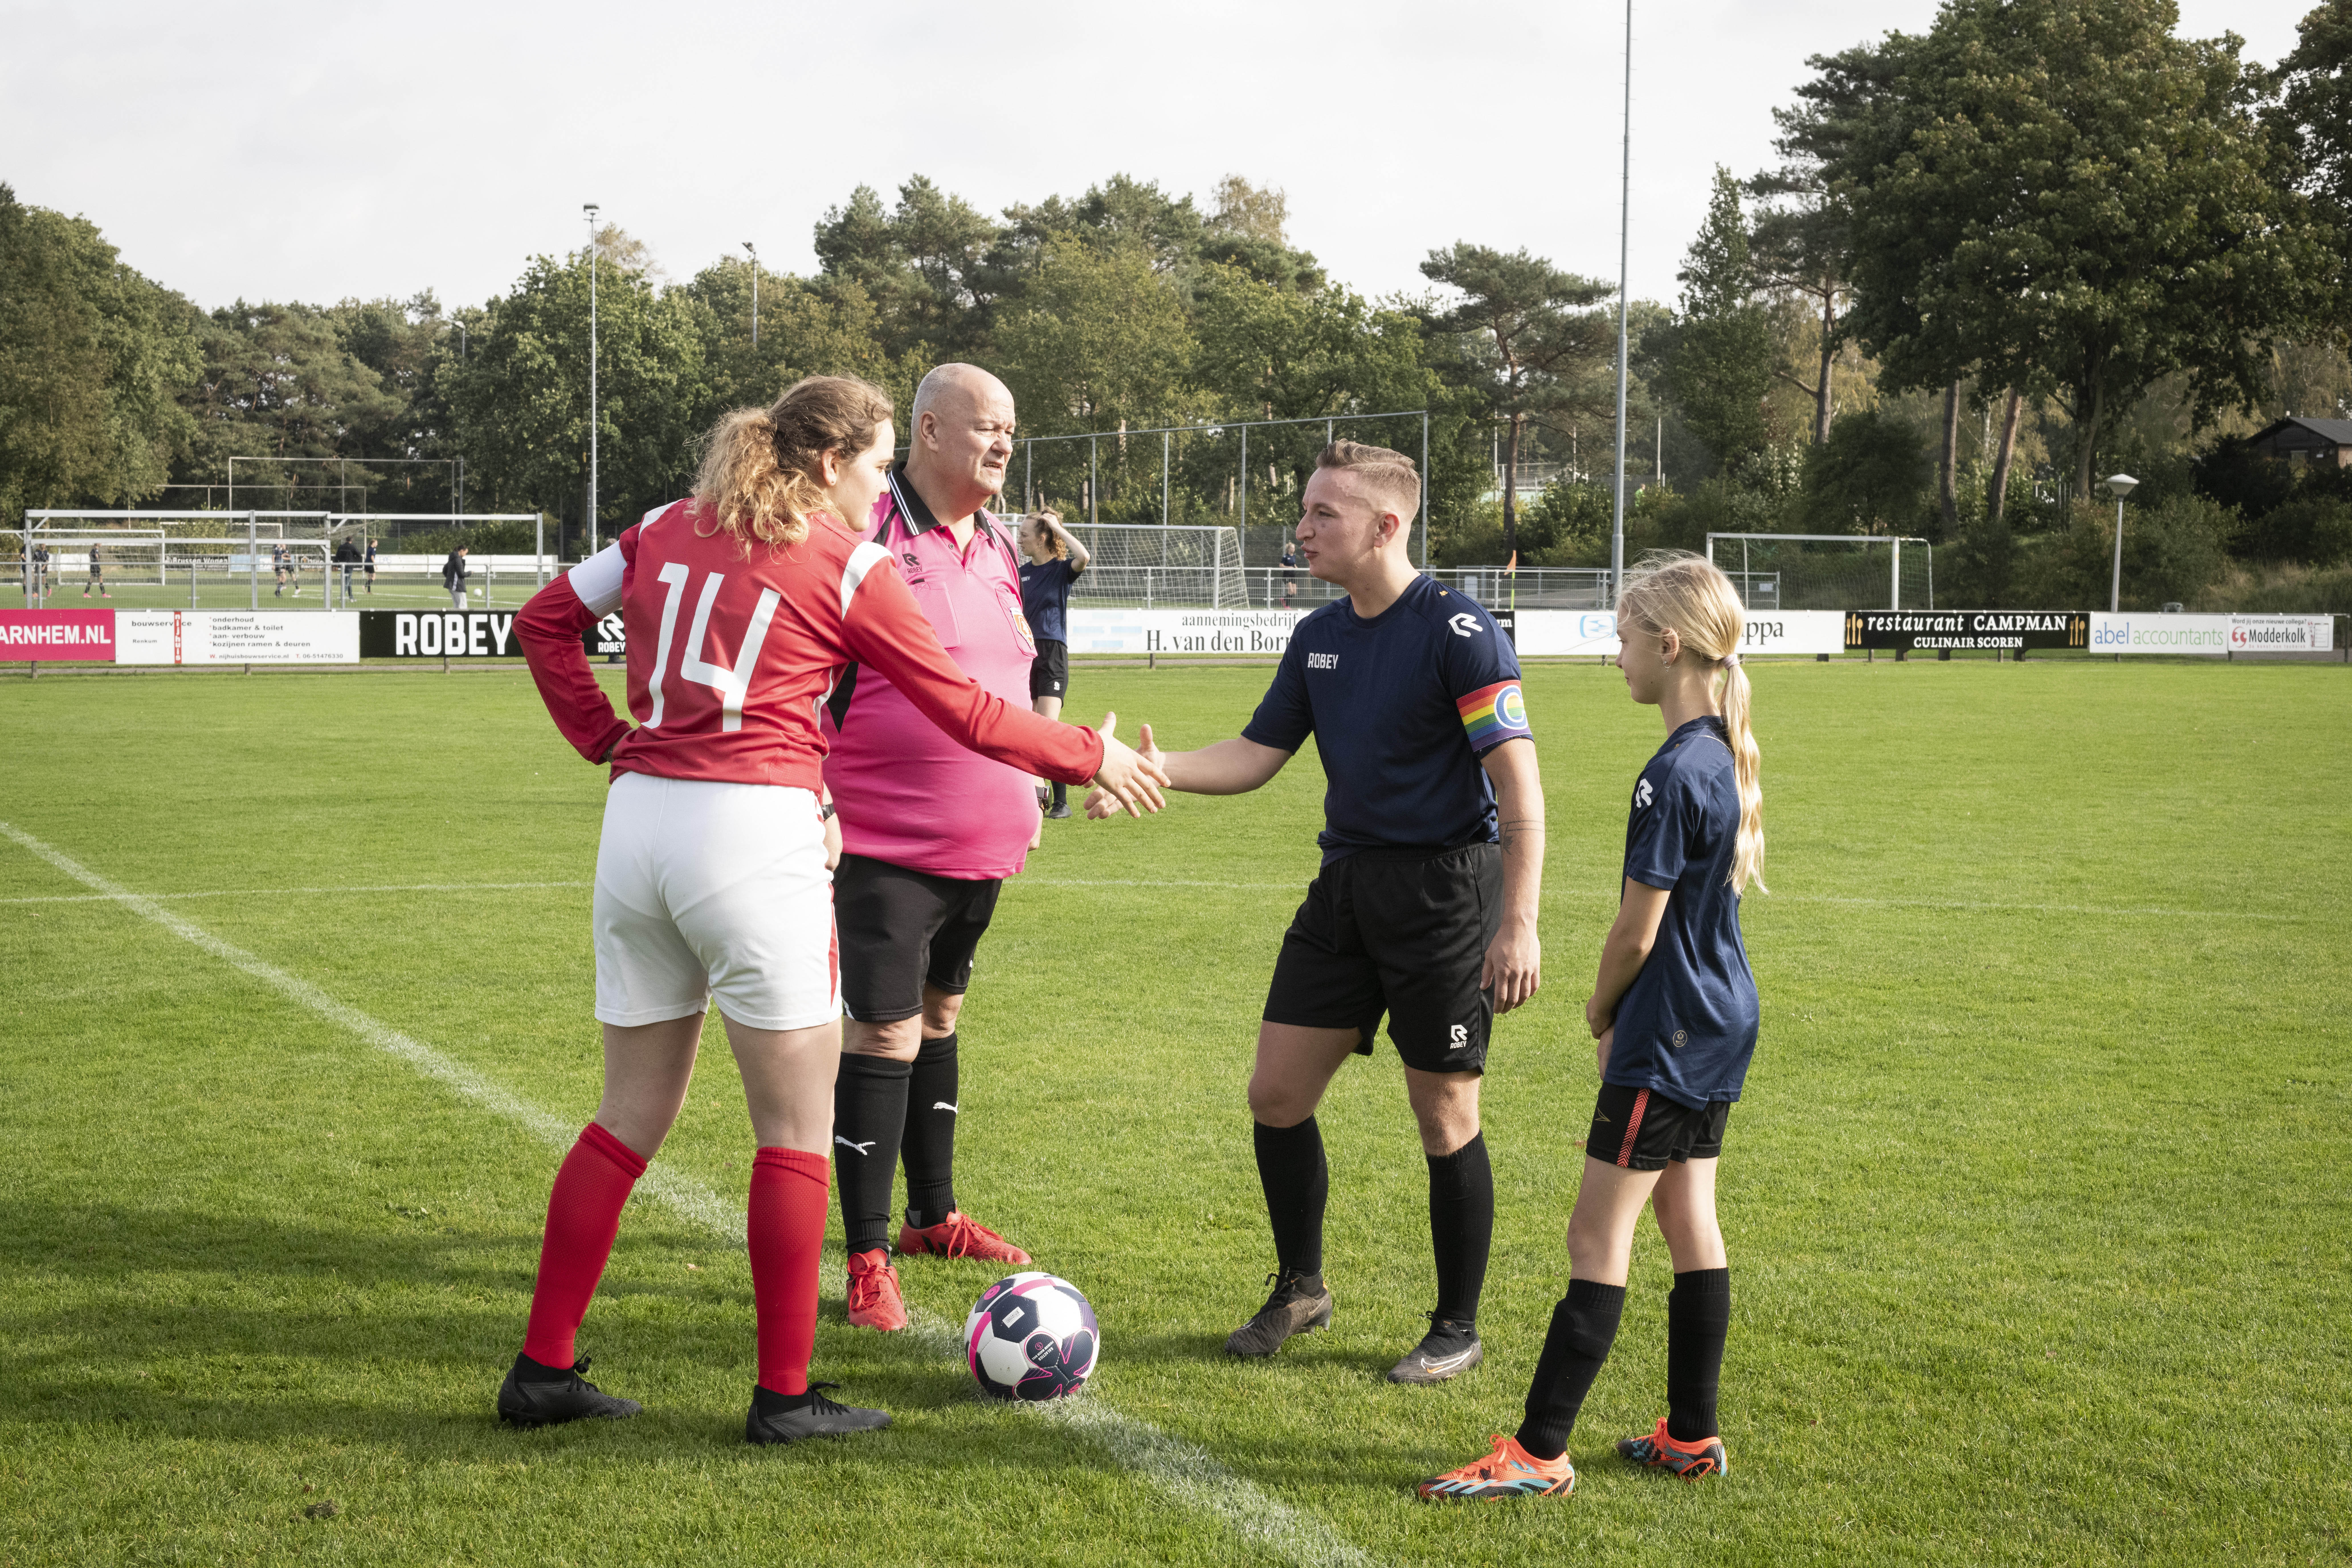 two football players shaking hands on the pitch next to the referee and a younger player. Two of them wear a dark blue and black jersey, the opponent wears a red and while jersey, and the referee is in black and red